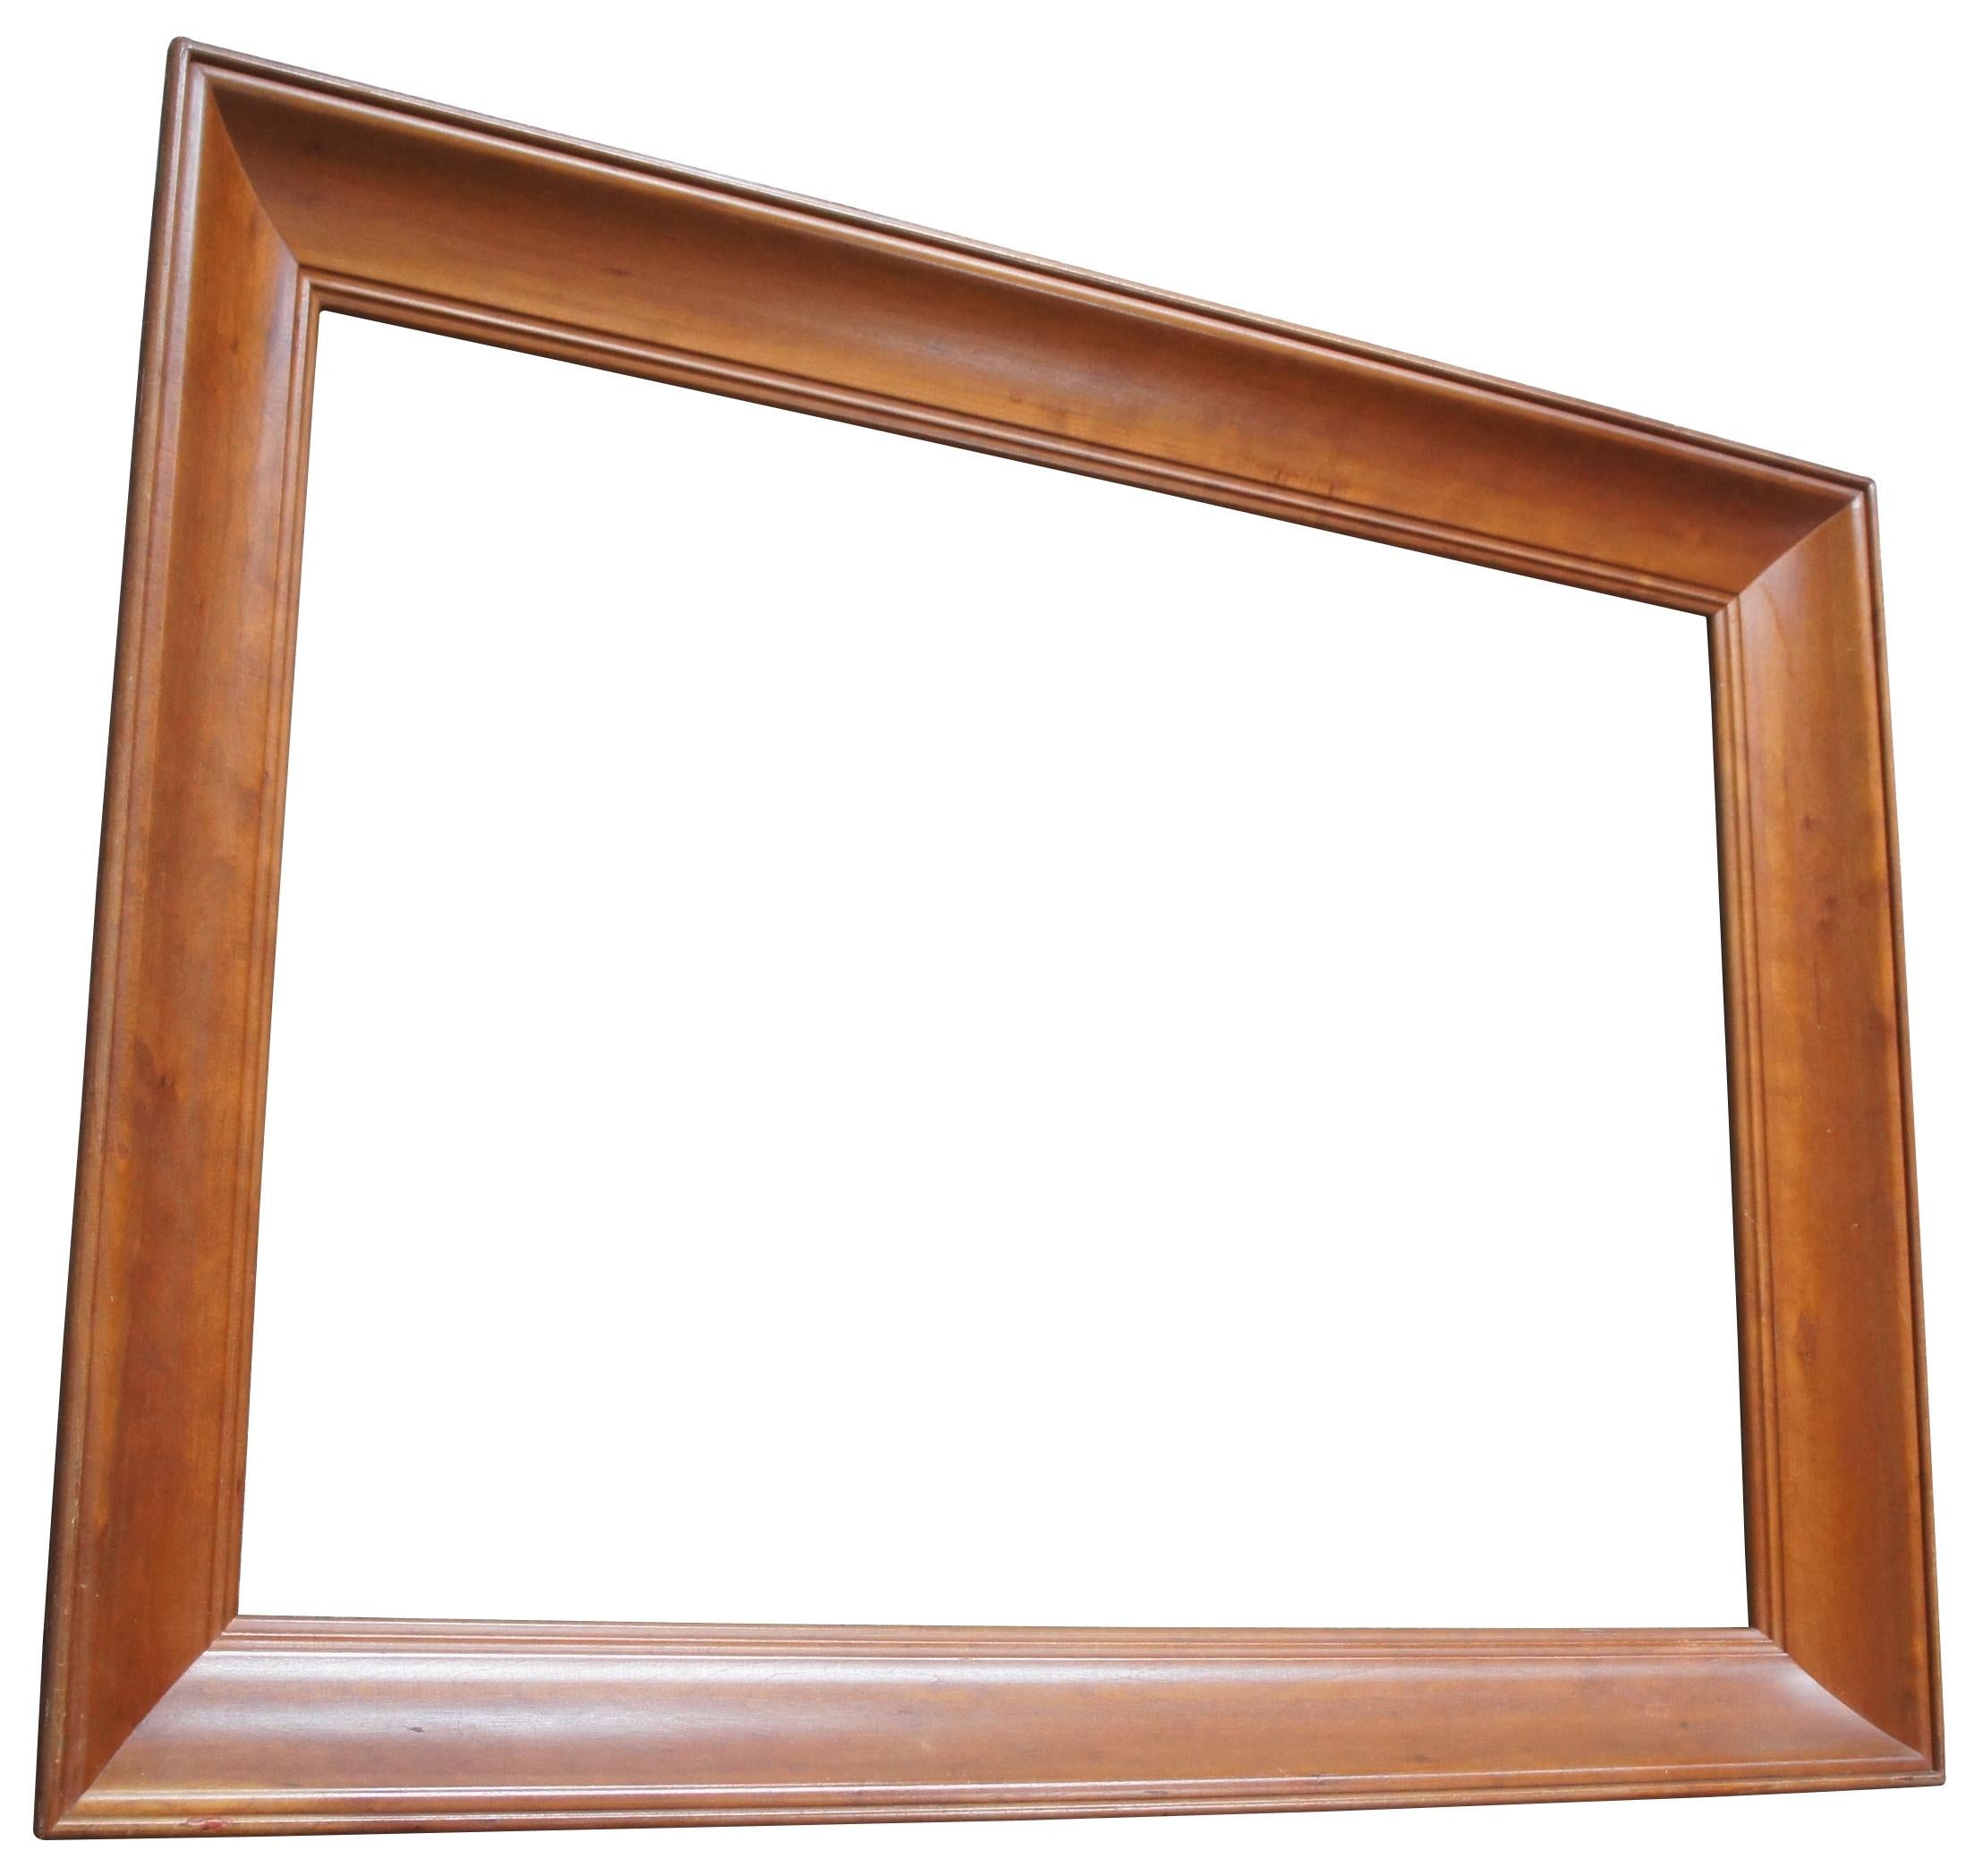 Vintage cherry rectangular picture or mirror frame.

Measures: 36.75